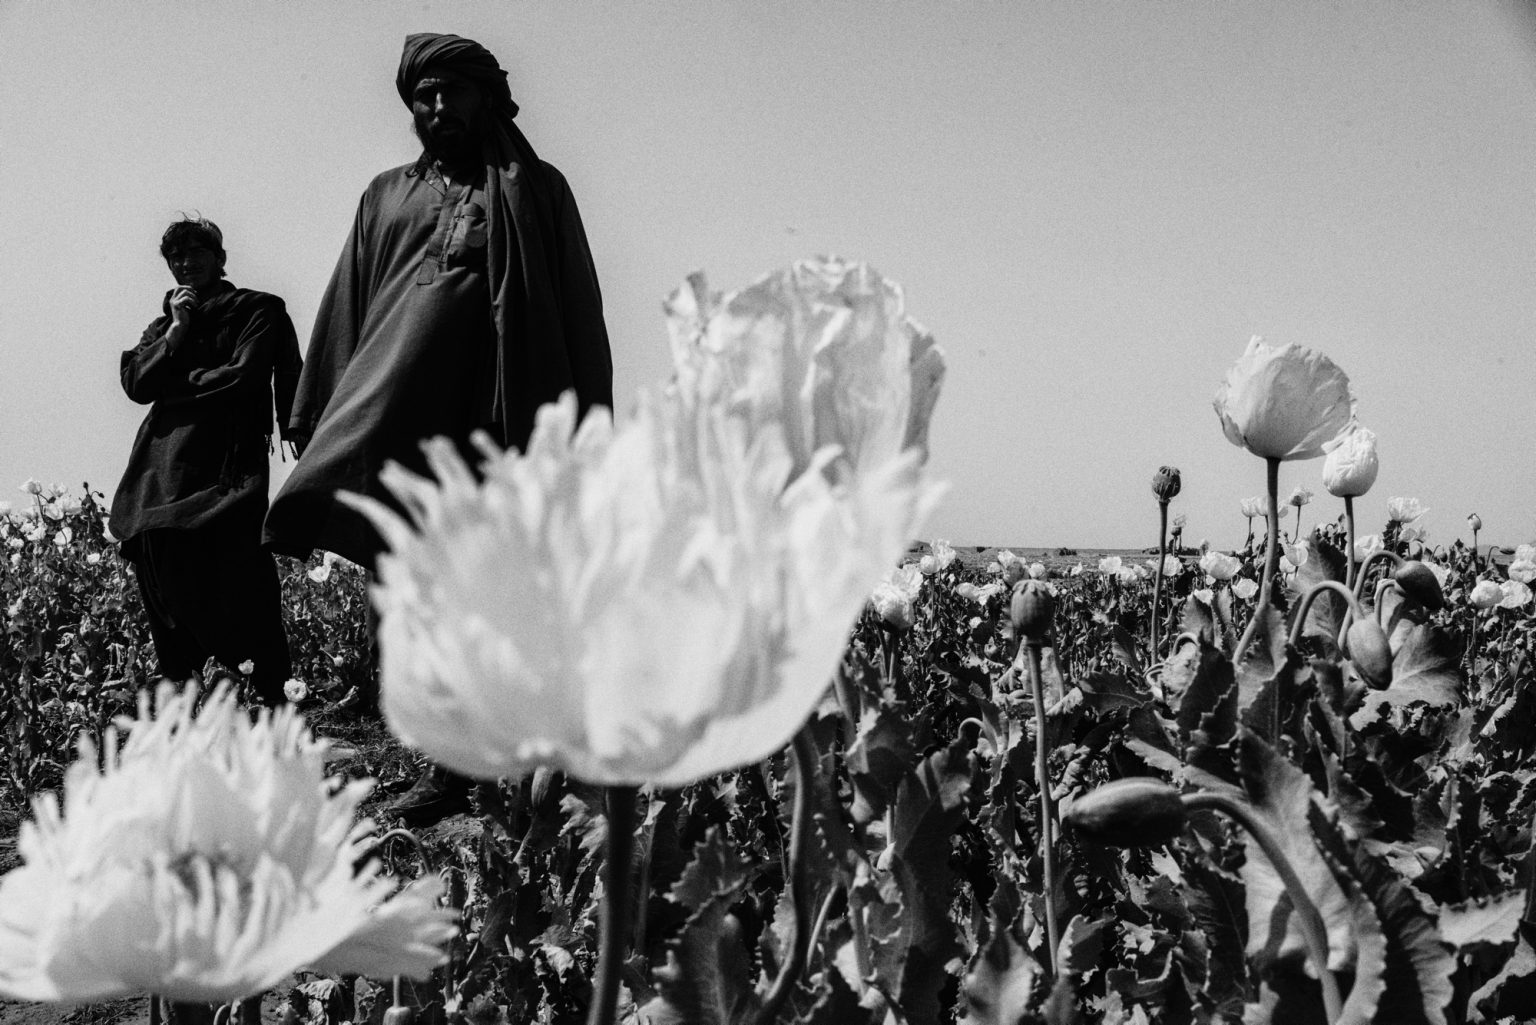 FARAH PROVINCE, AFGHANISTAN - MARCH 18, 2022:
Farmers stand on their opium field in Farah province.
(Photo by Lorenzo Tugnoli/The Washington Post/Contrasto)